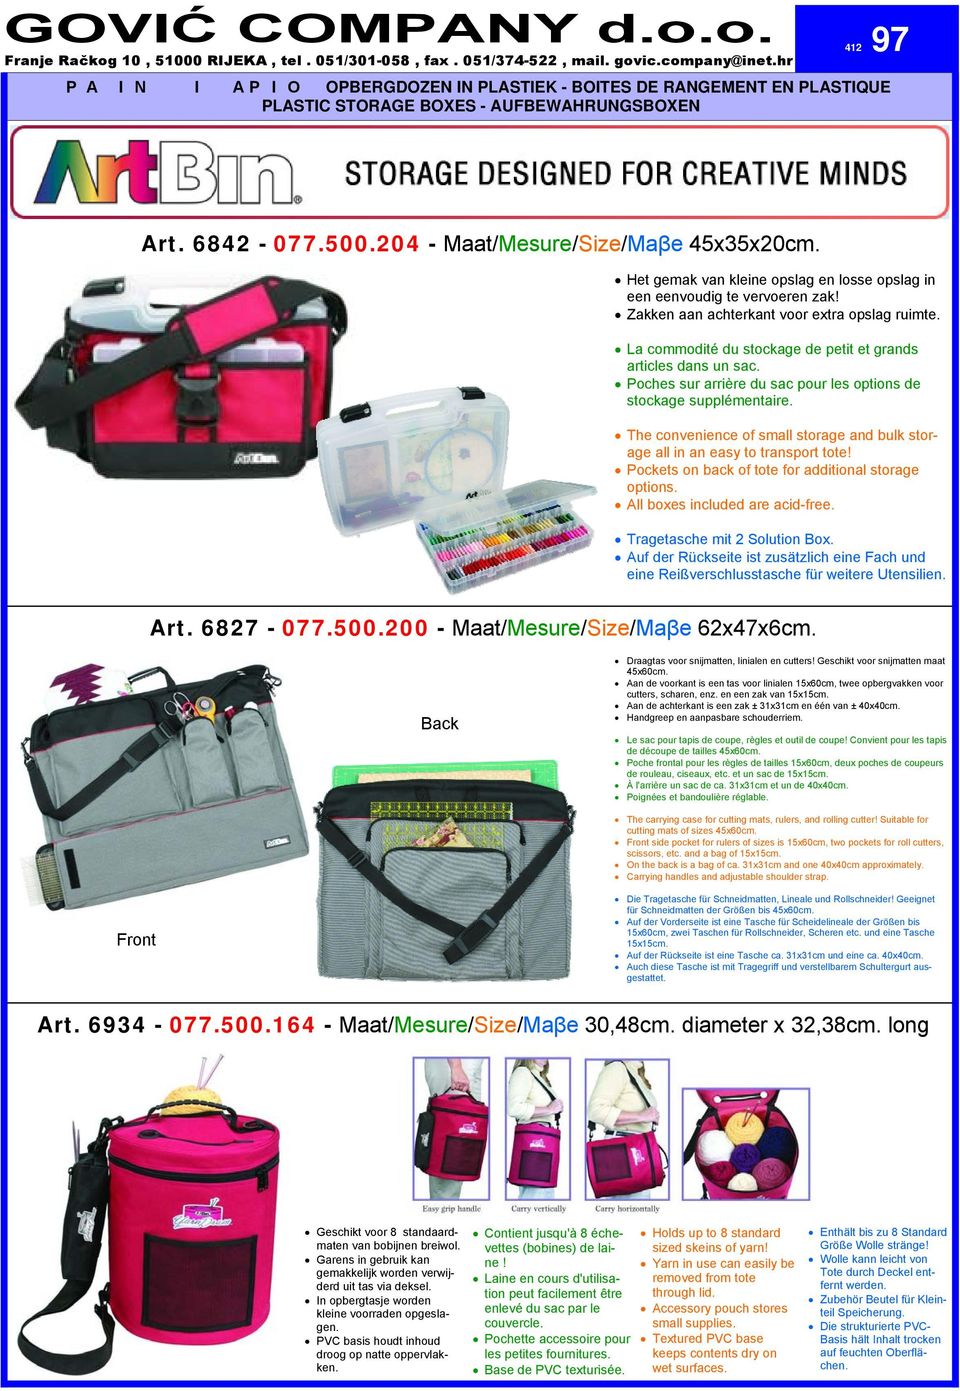 The convenience of small storage and bulk storage all in an easy to transport tote! Pockets on back of tote for additional storage options. All boxes included are acid-free.